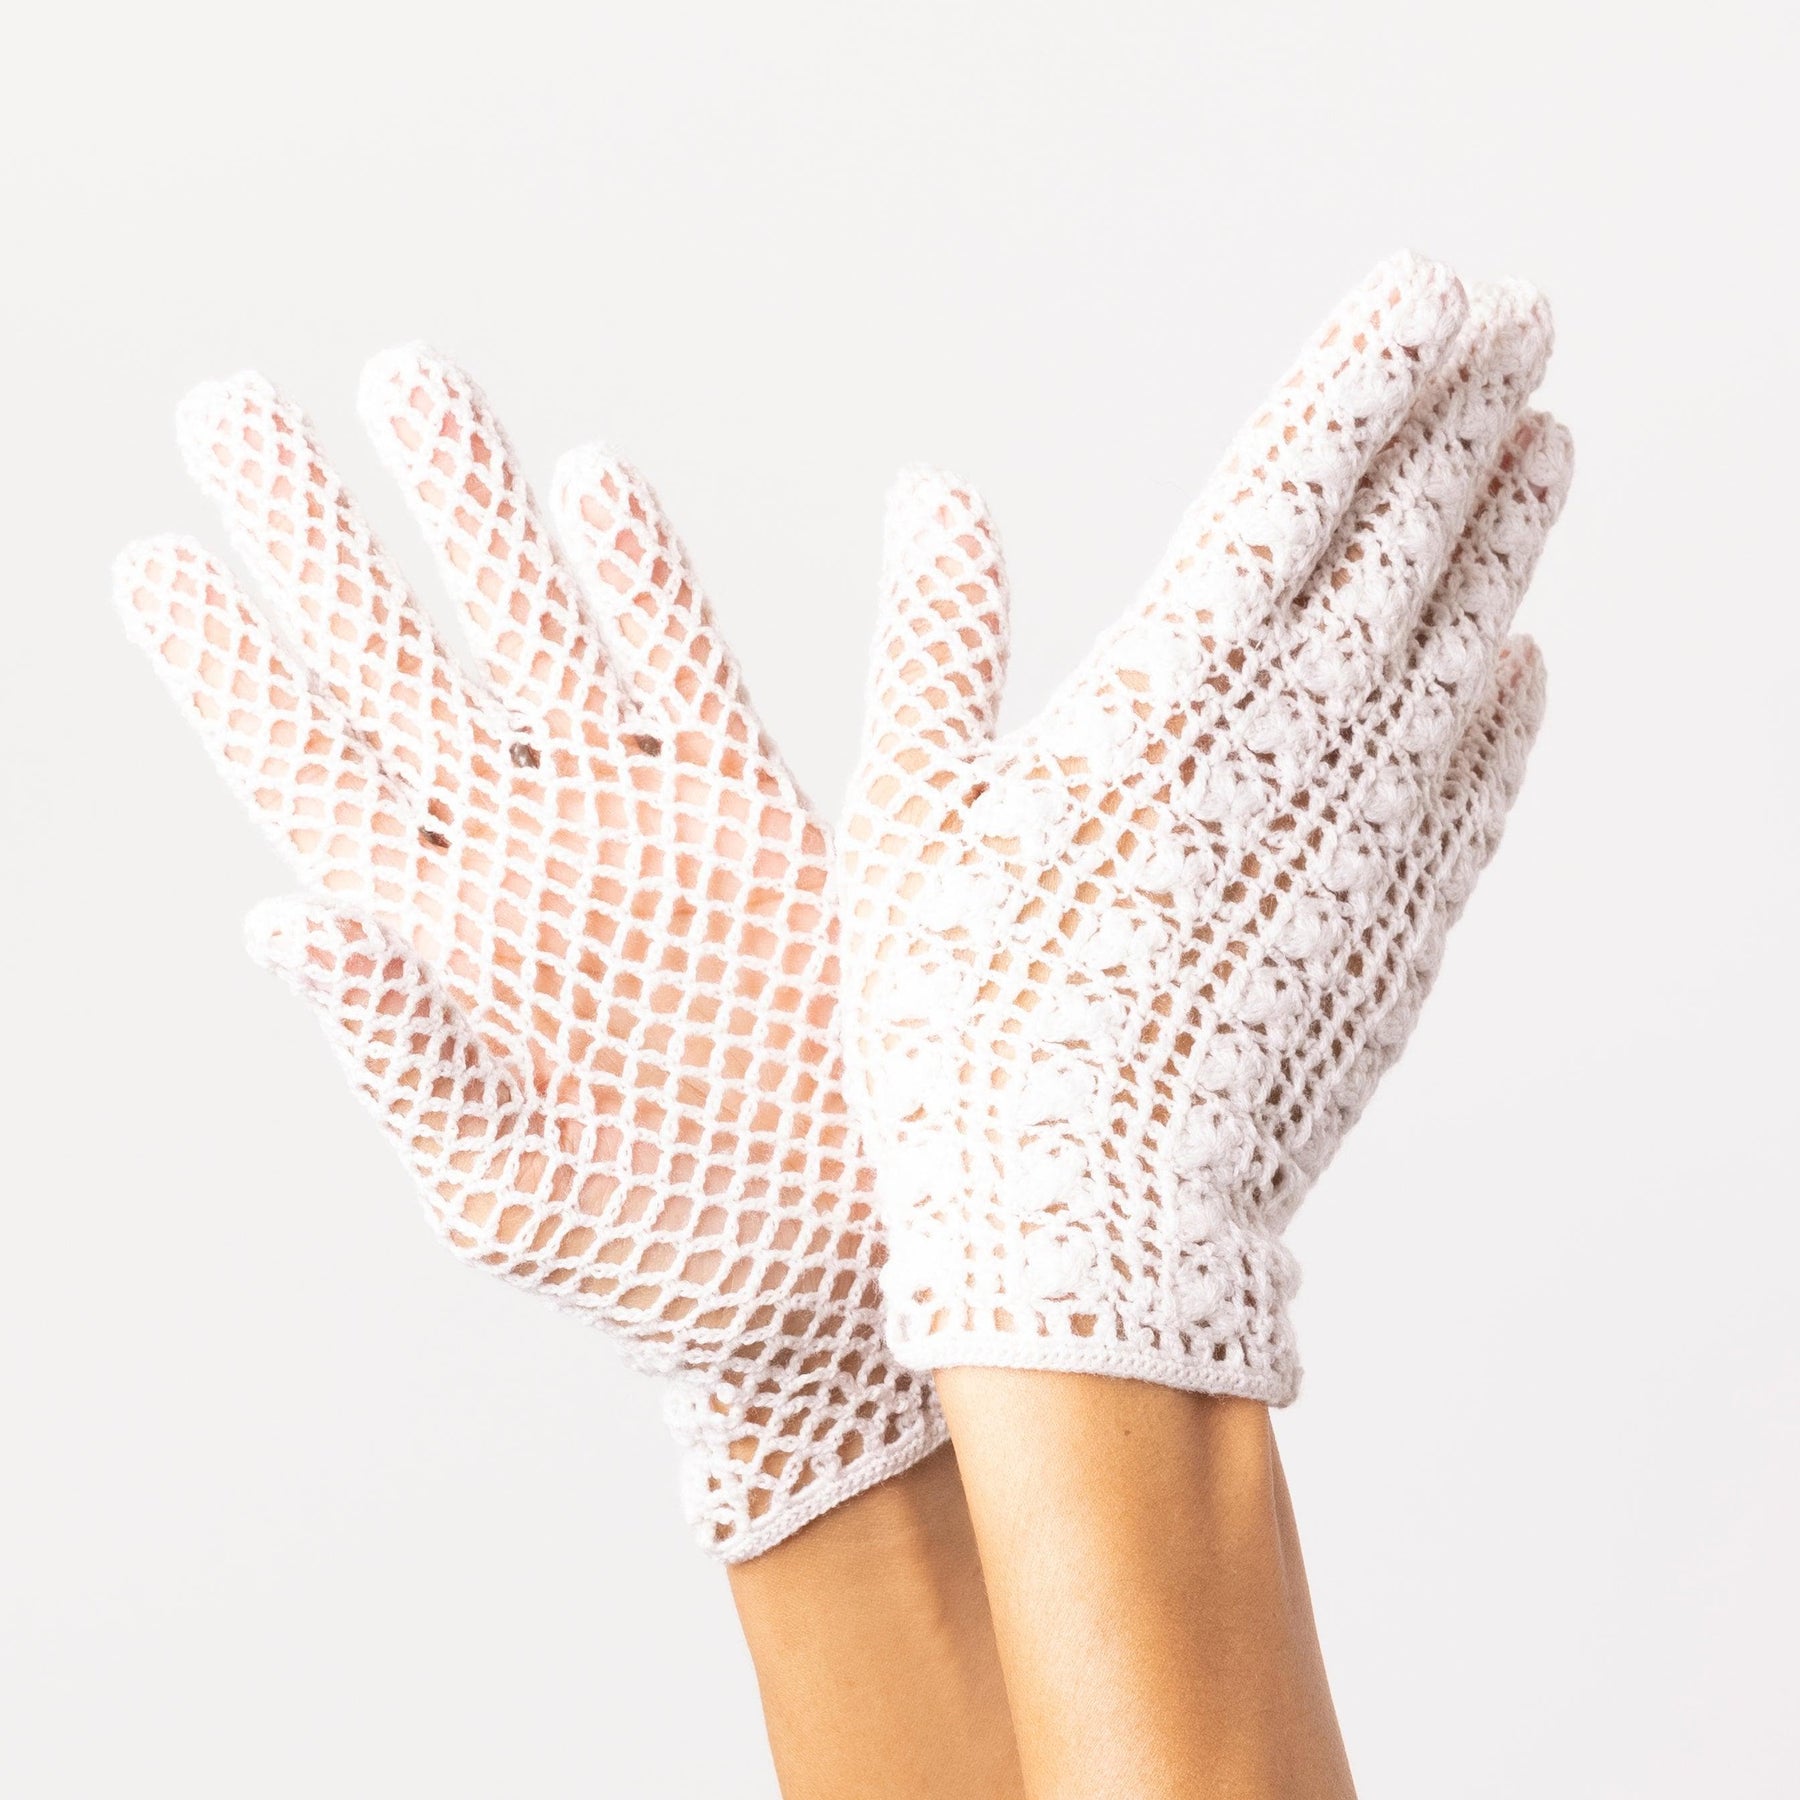 White wool gloves by Seymoure Gloves.